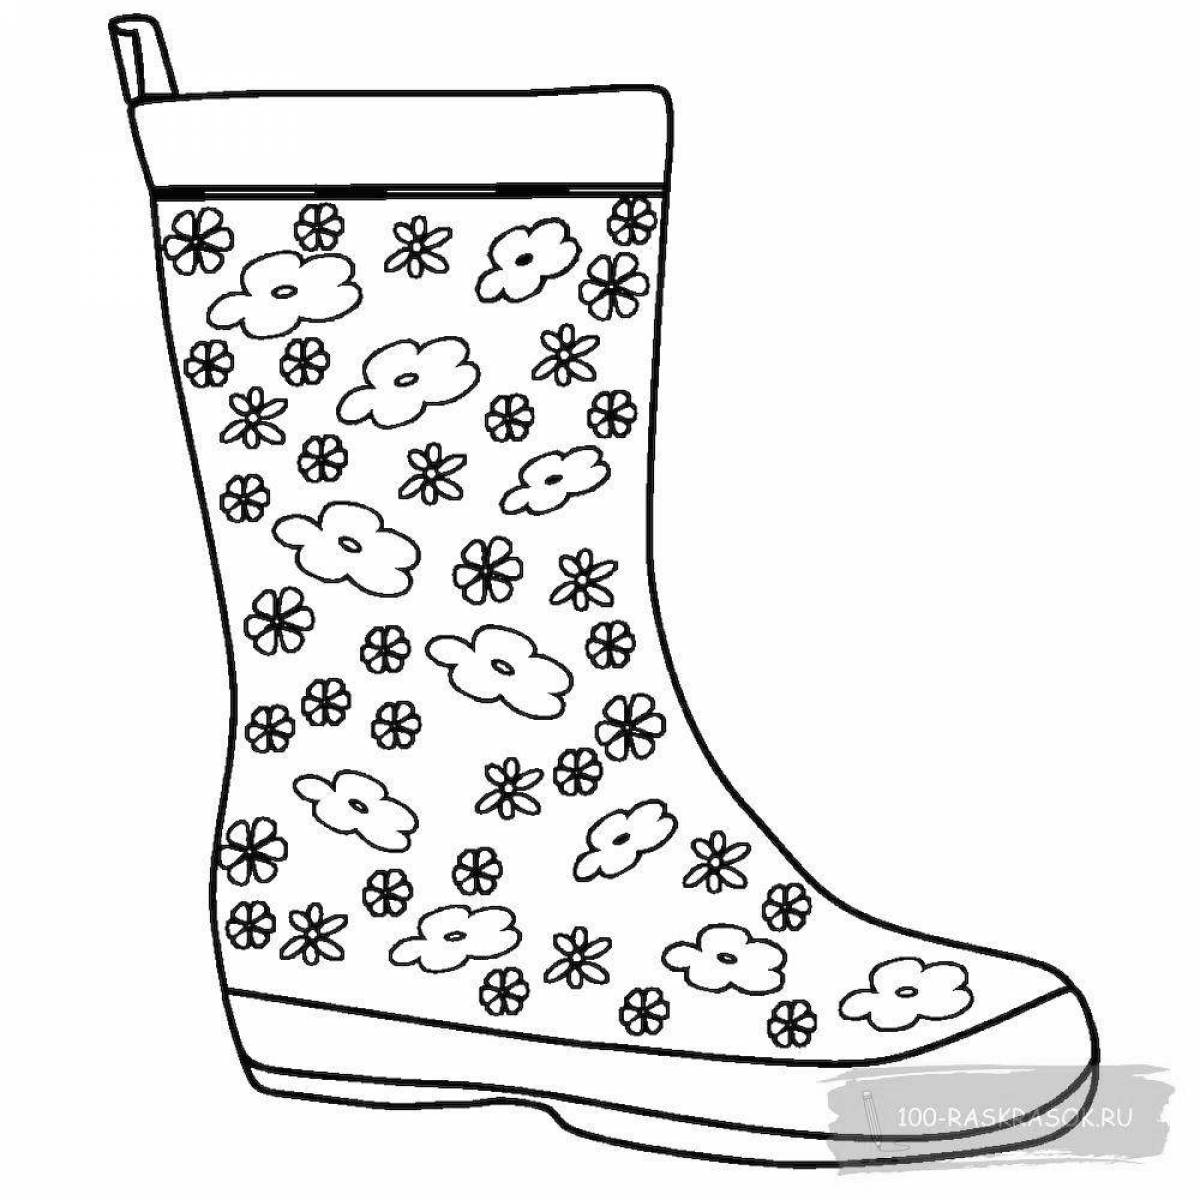 Attractive rubber boots coloring page